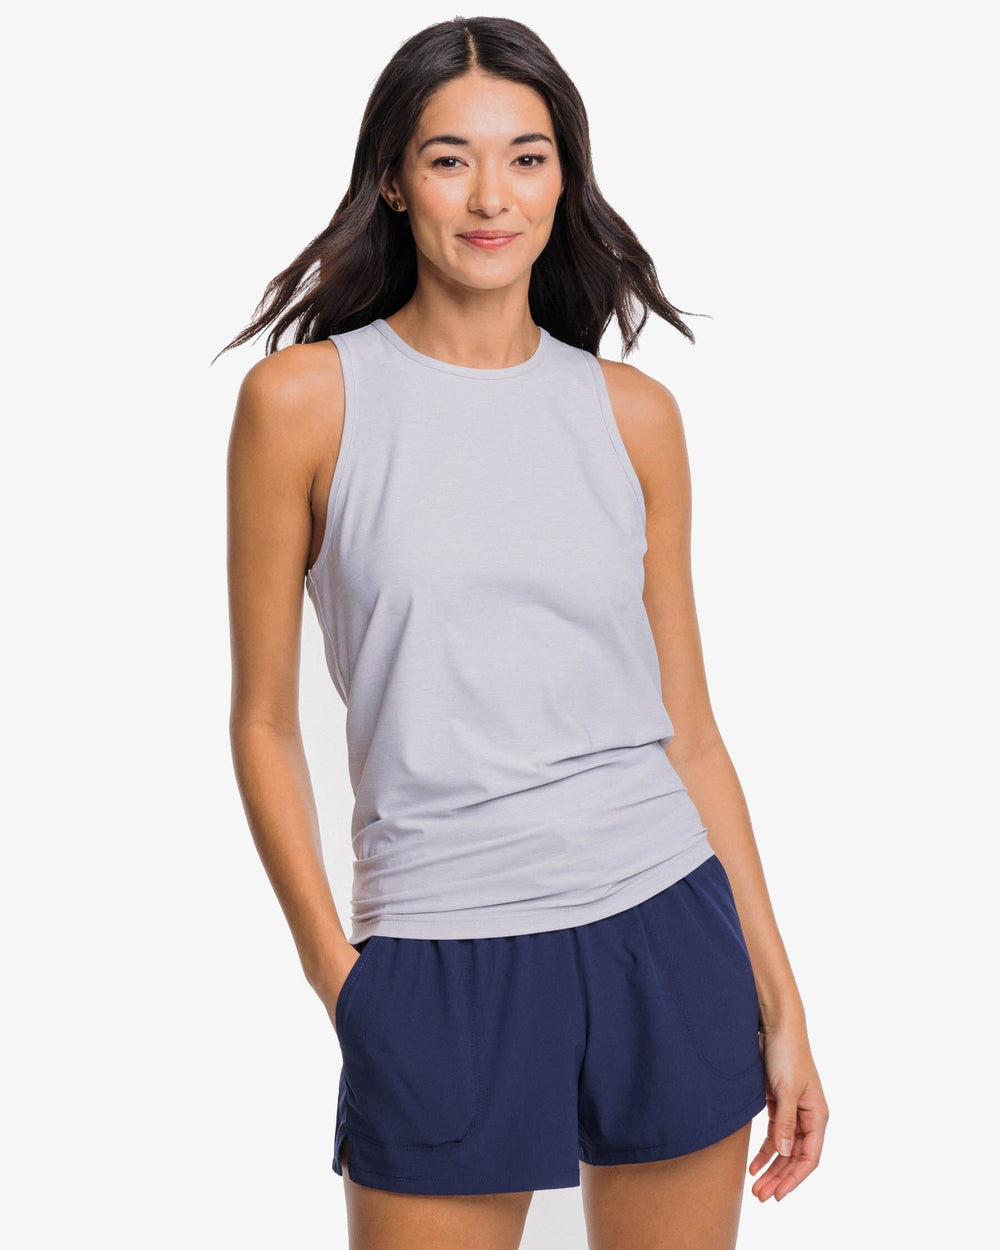 The front view of the Southern Tide Cora brrr illiant Tie Back Tank by Southern Tide - Platinum Grey